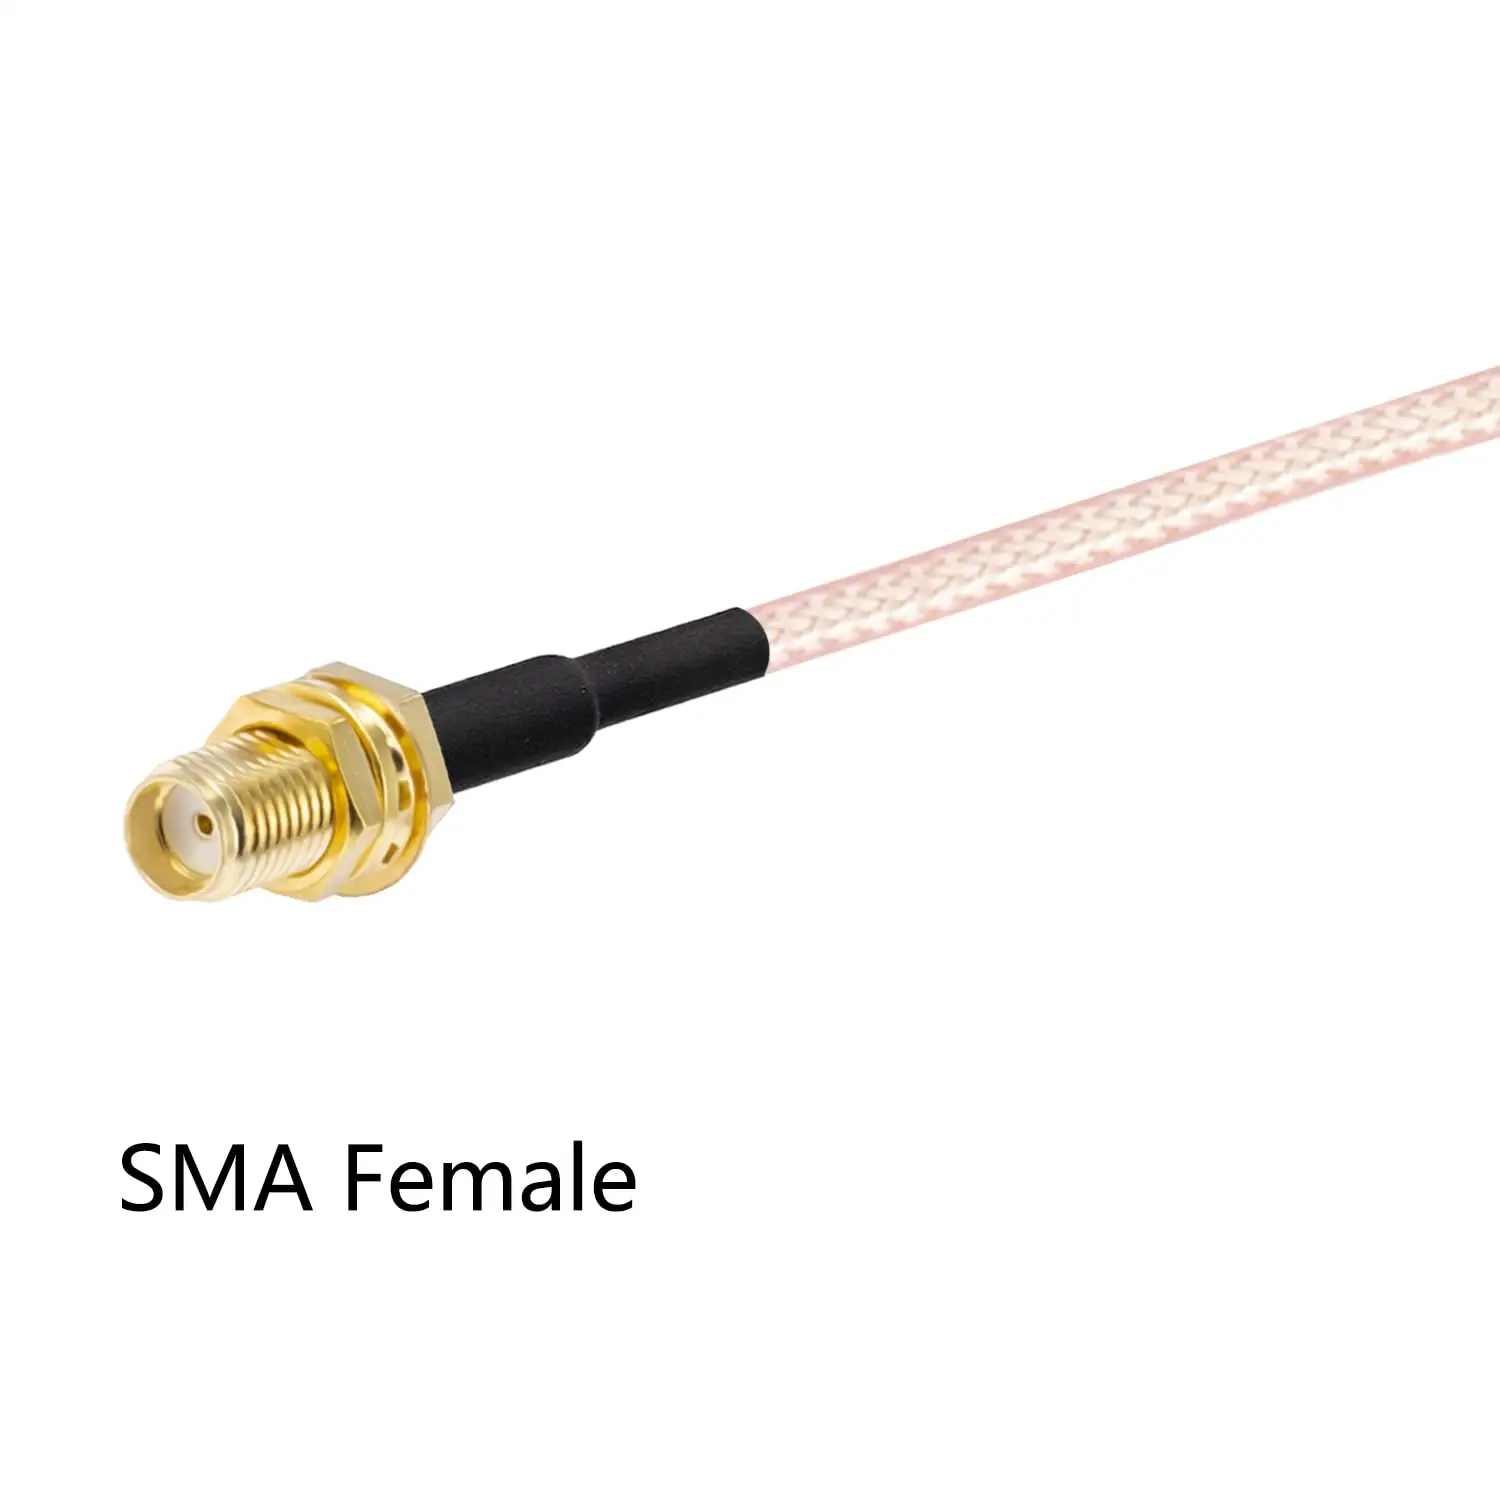 SMA Splitter Cable SMA Female To SMA Dual Male Connector Coaxial Cable 3 Way Splitter V Type RG316 15CM